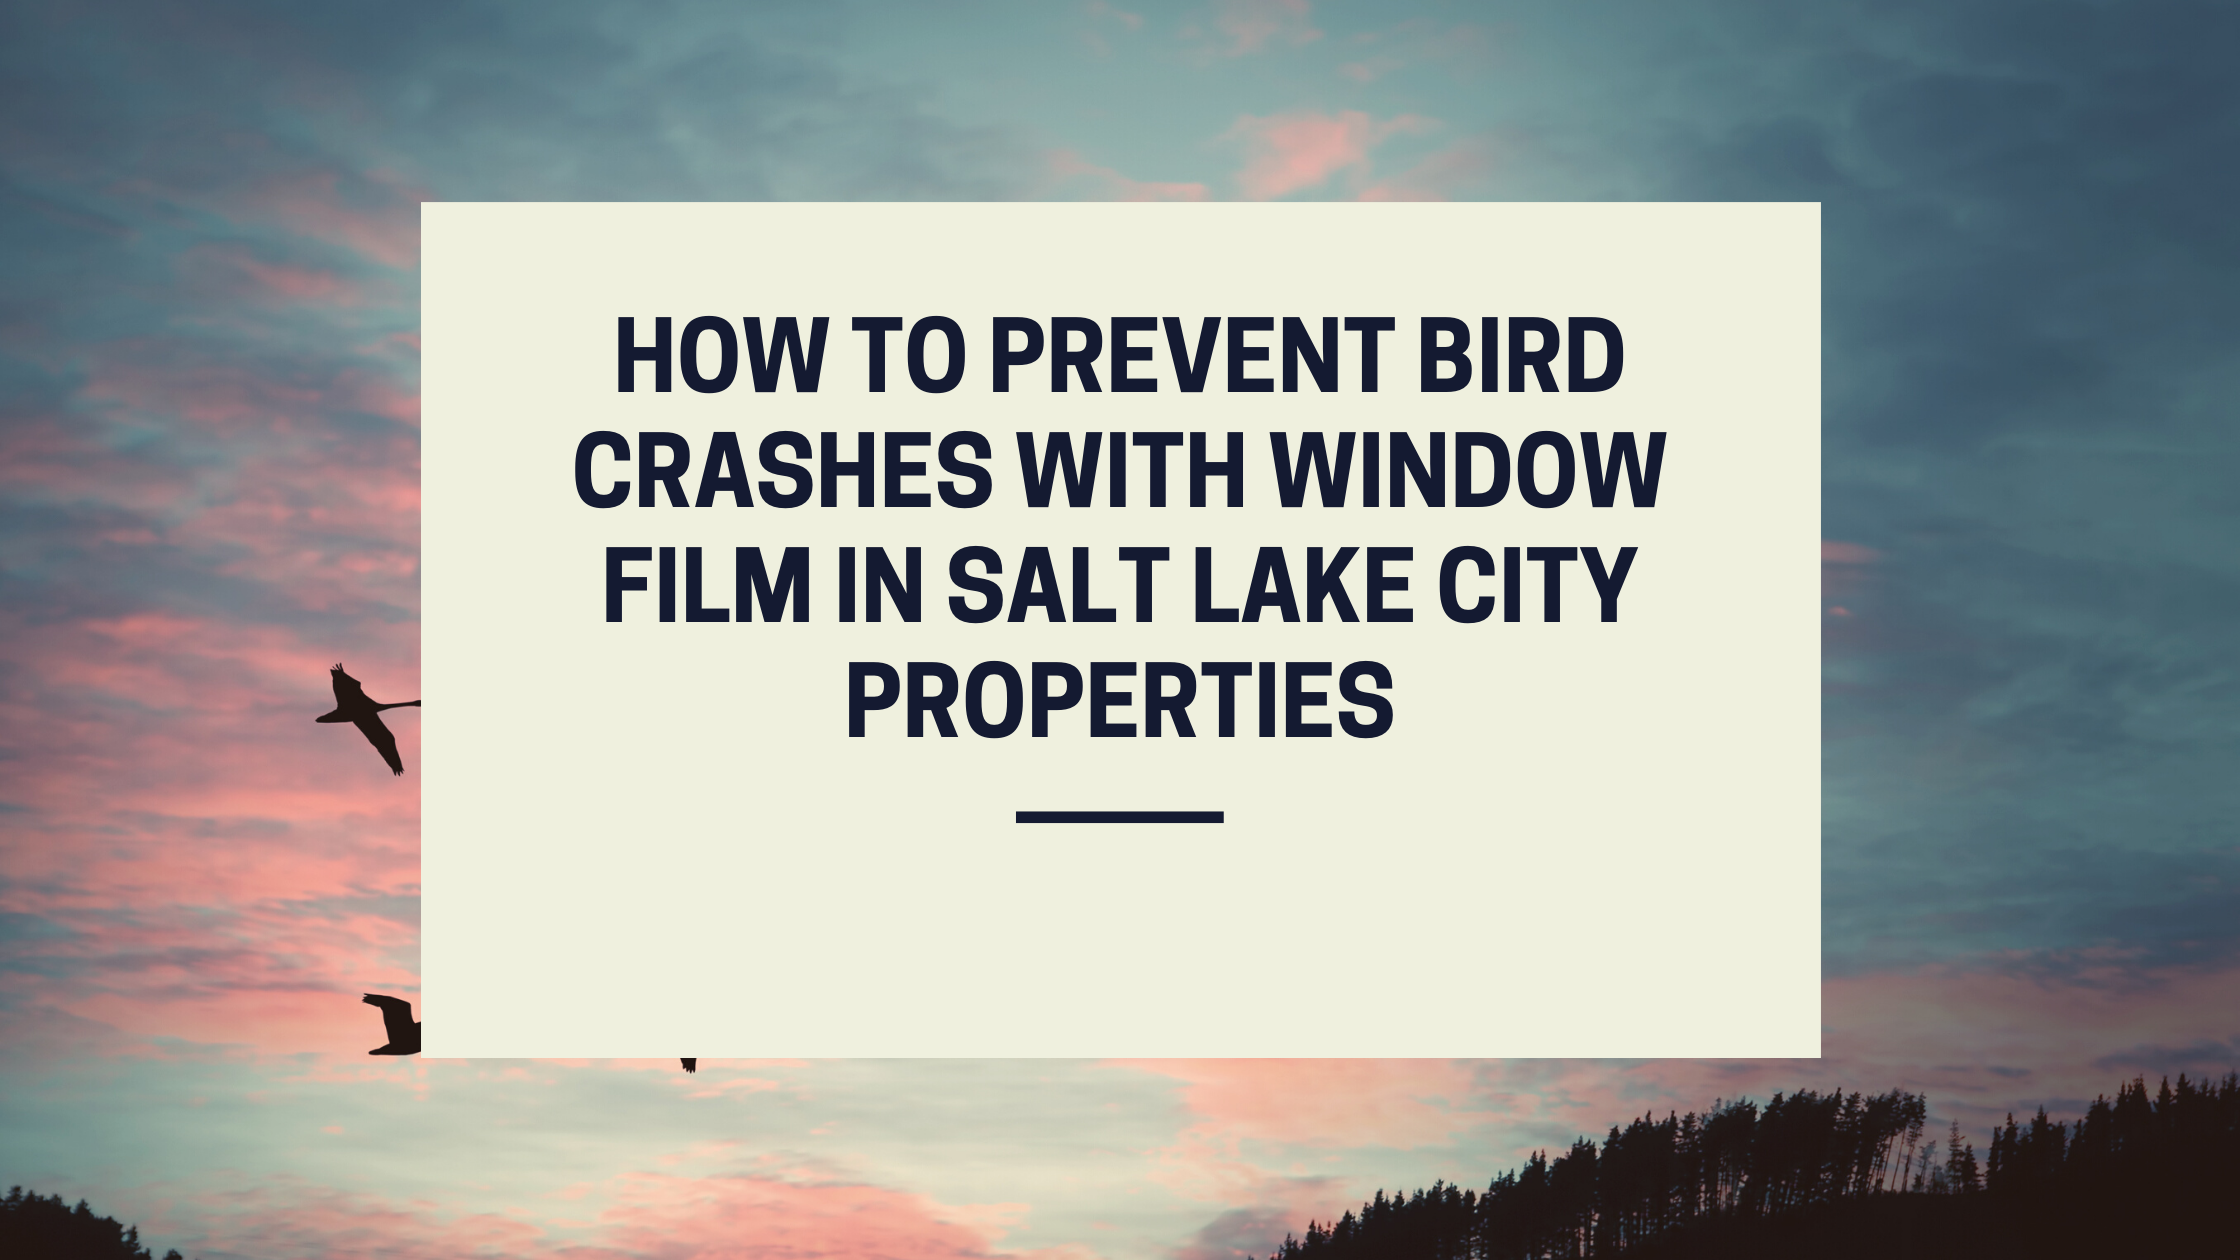 How to Prevent Bird Crashes With Window Film In Salt Lake City Properties